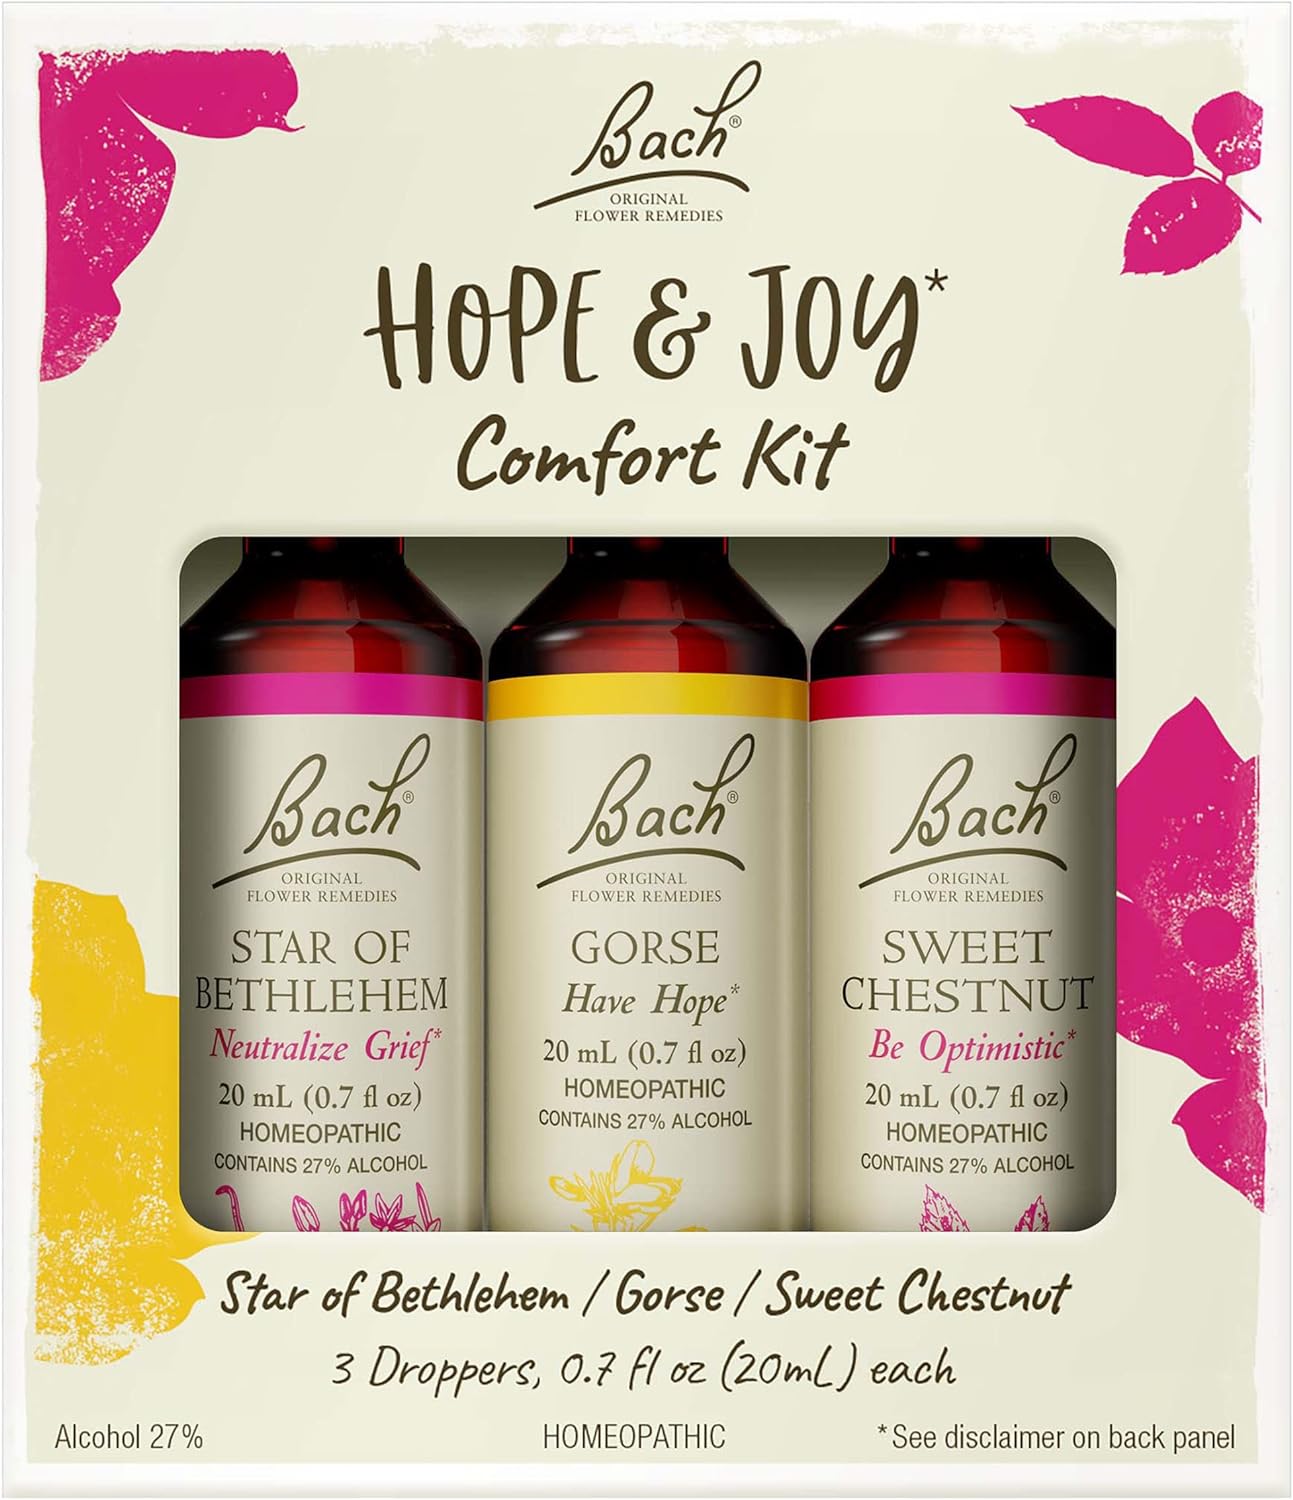 Bach Original Flower Remedies, Hope and Joy Kit, For Comfort and Optimism, Natural Homeopathic Flower Essence, Holistic Wellness, Vegan, 3 x 20mL Droppers